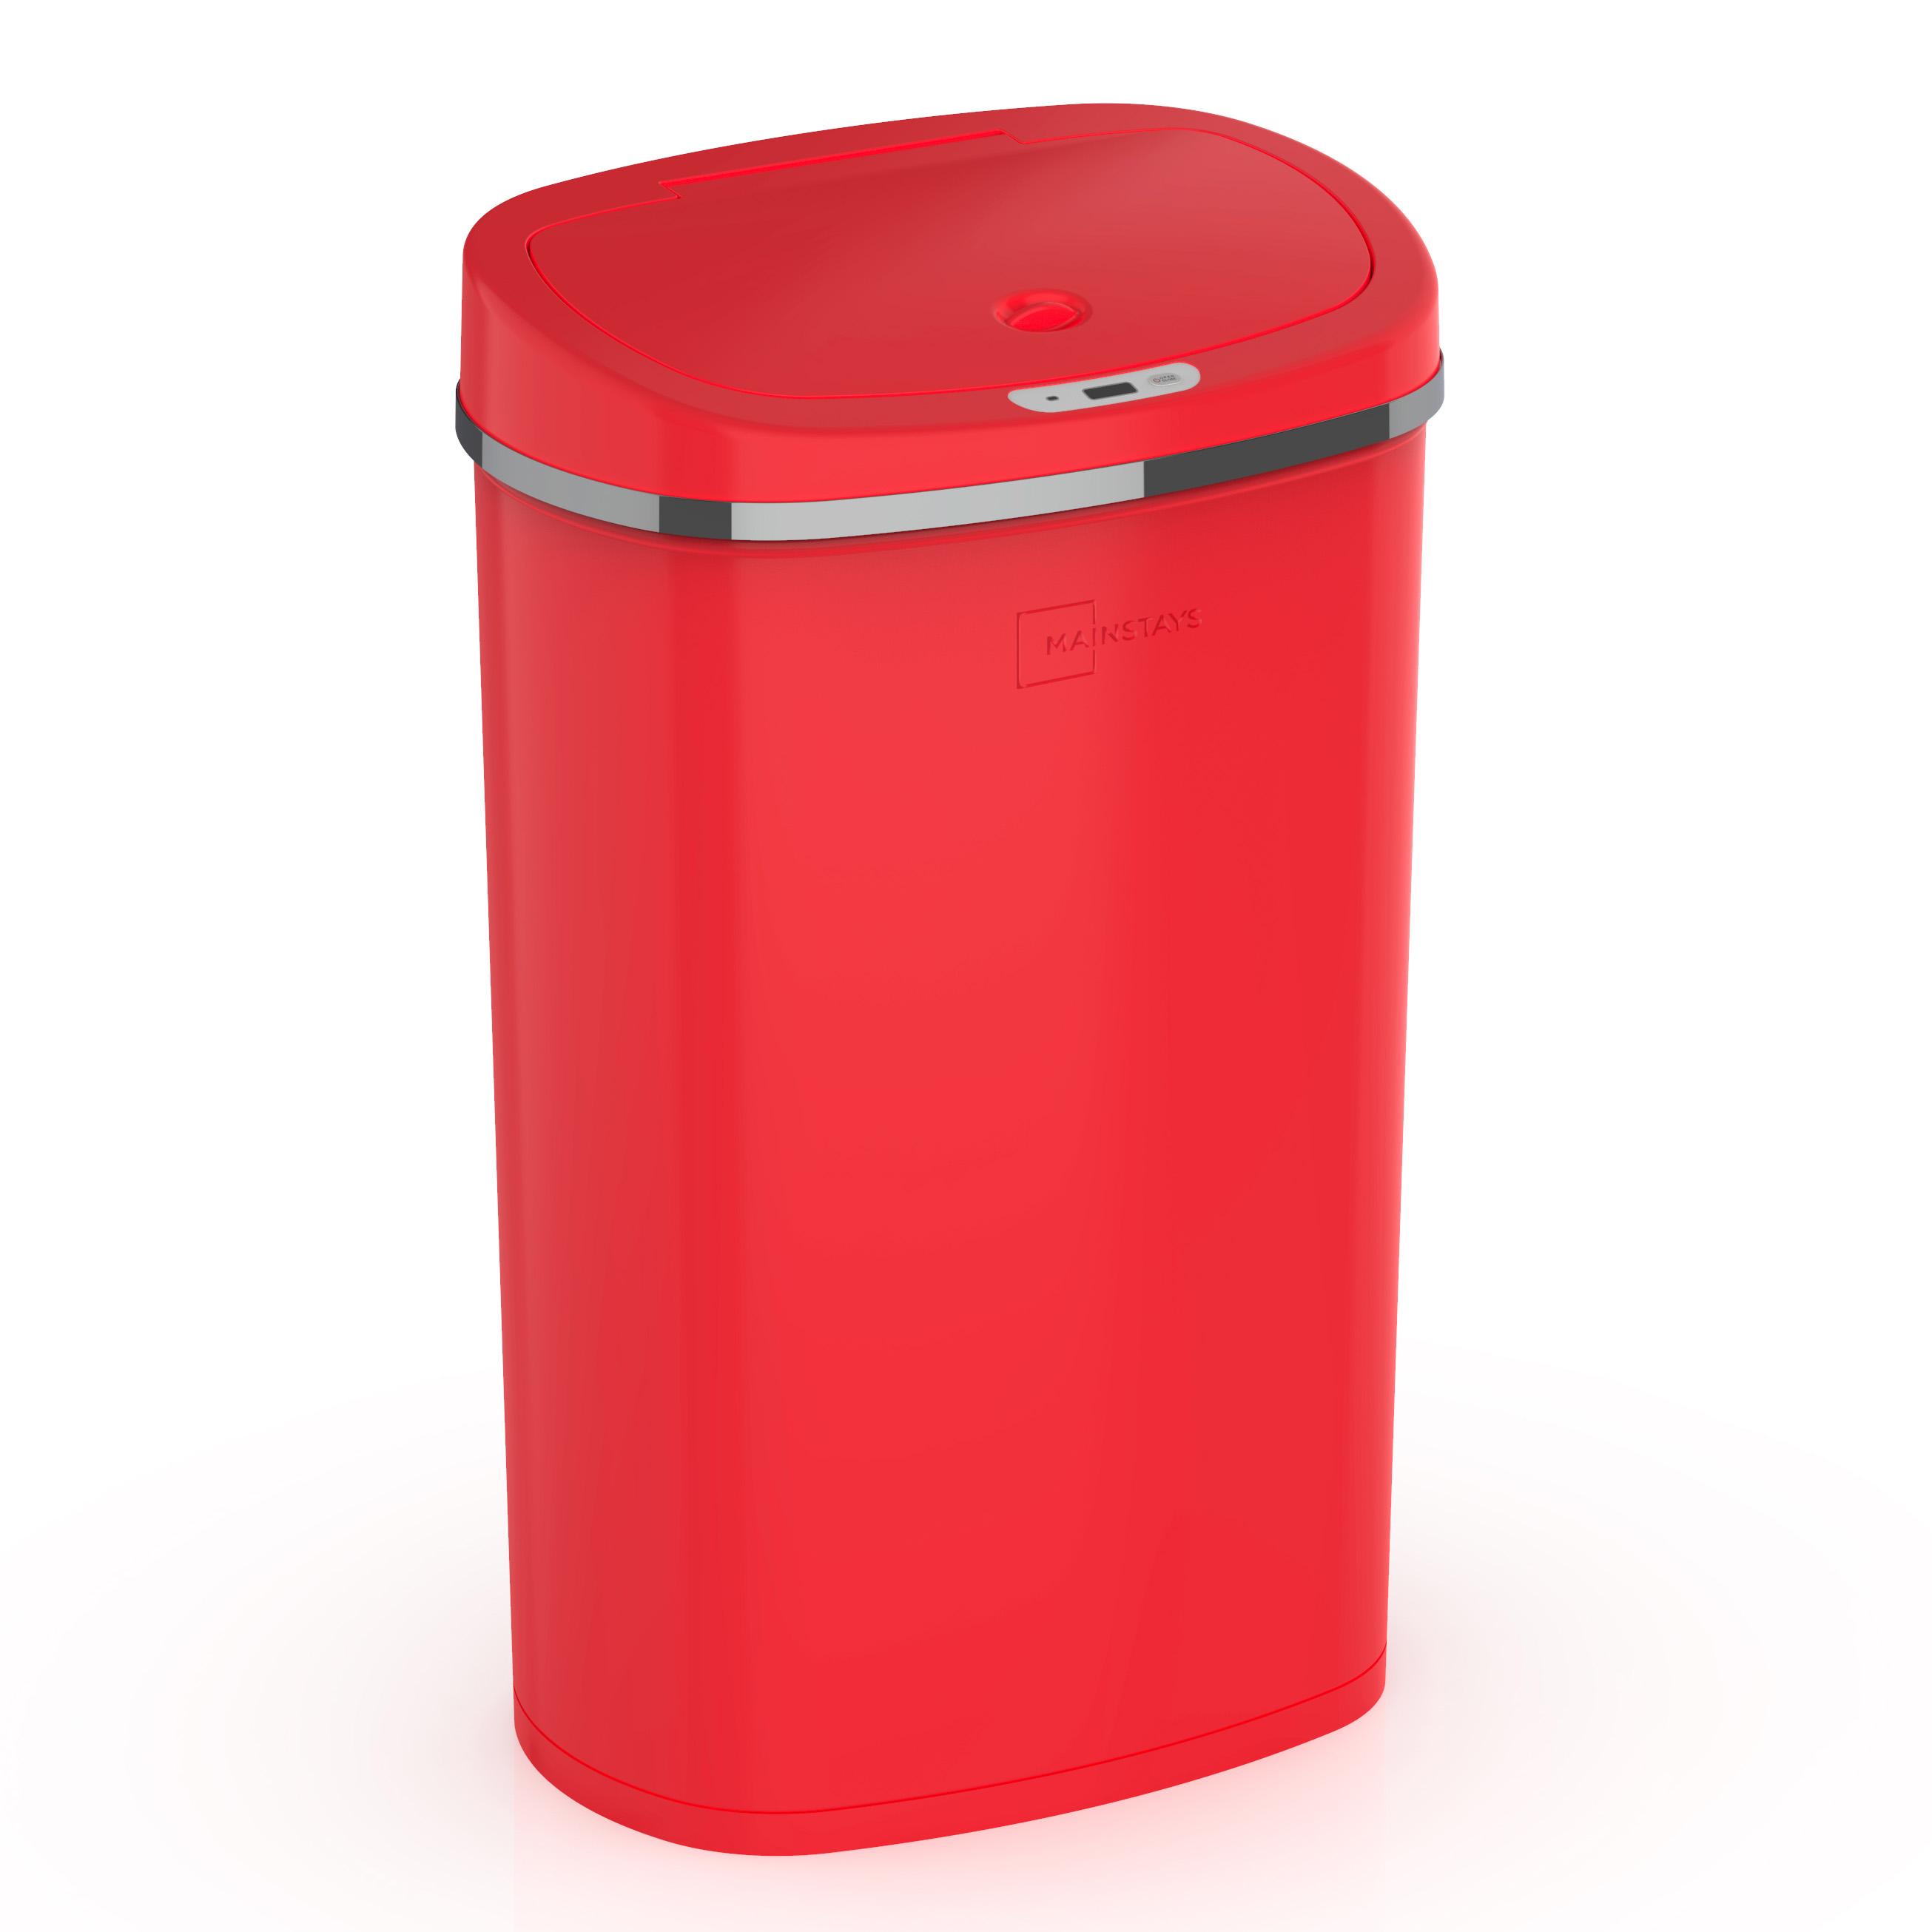 13.2G Mainstays Motion Sensor Stainless Steel Trash Can for $34.98 Shipped